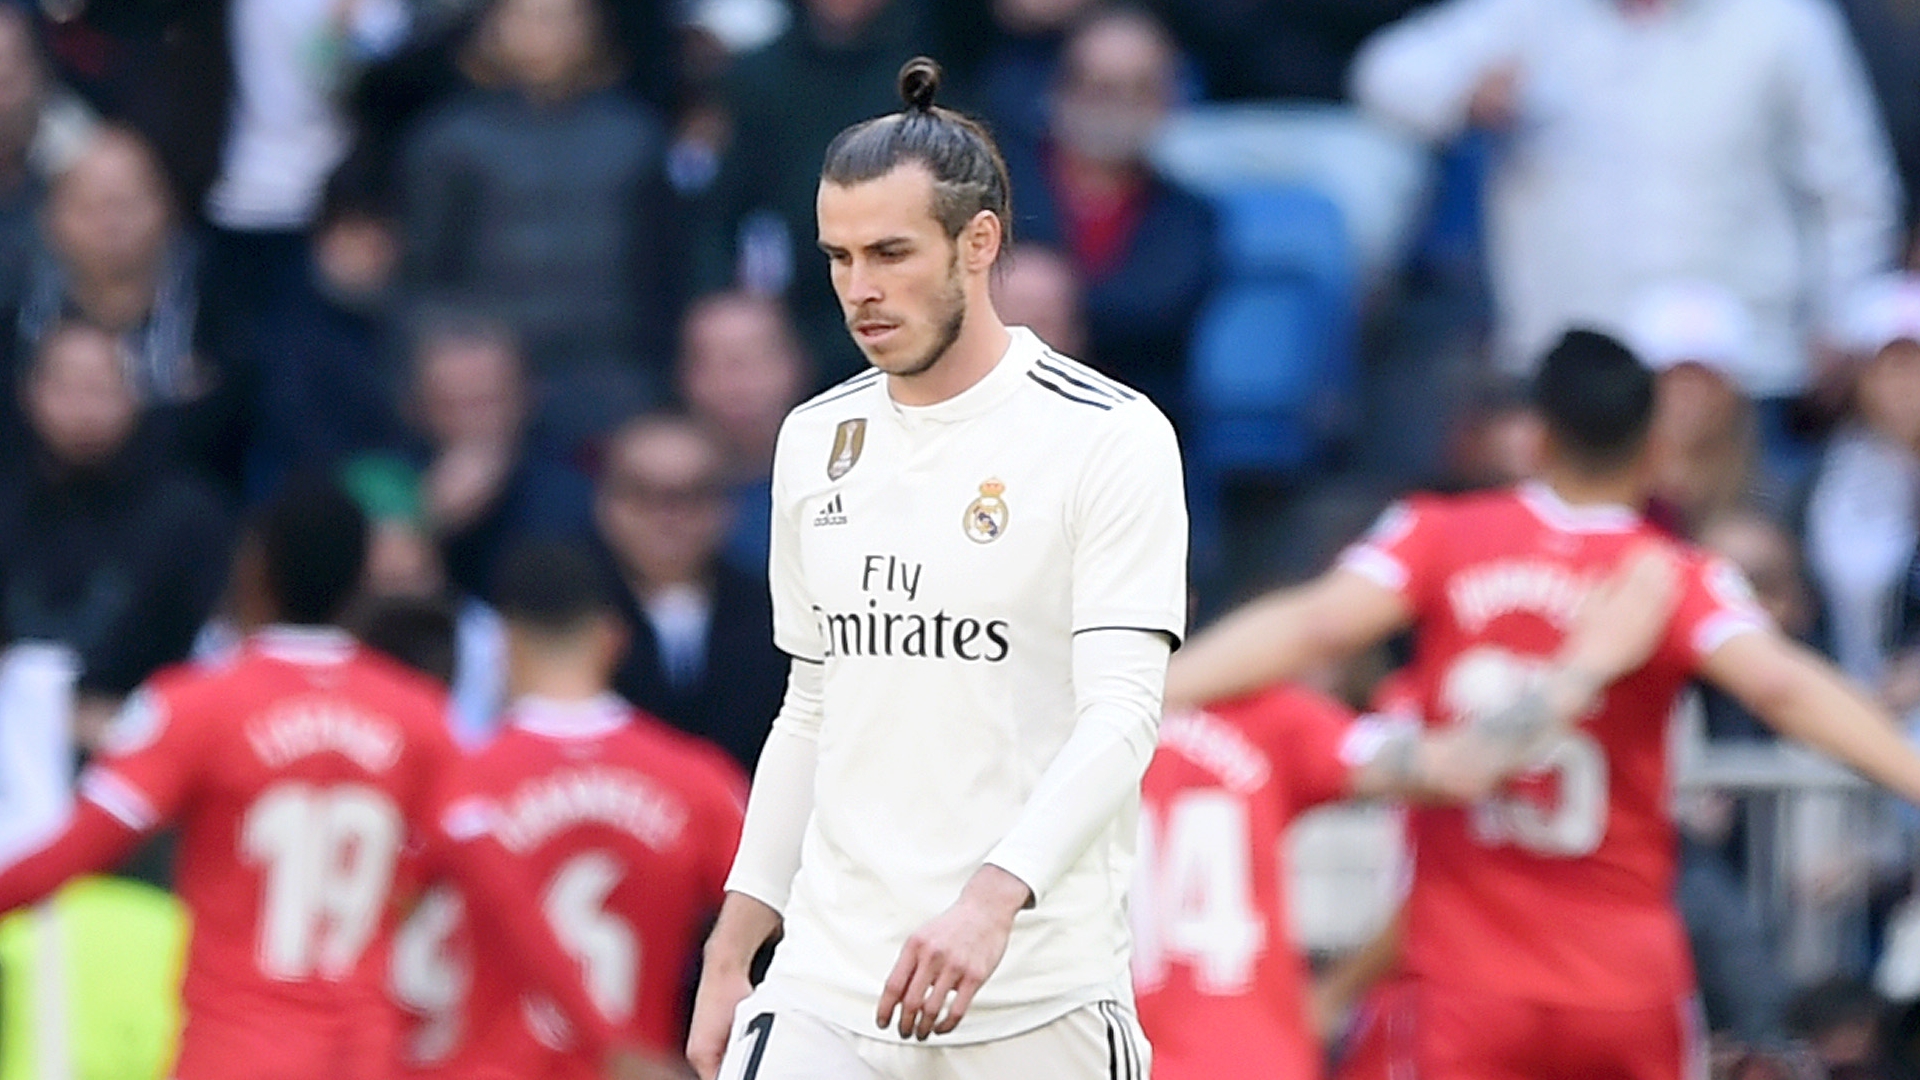 Image result for real madrid Gareth bale booed by barca fans